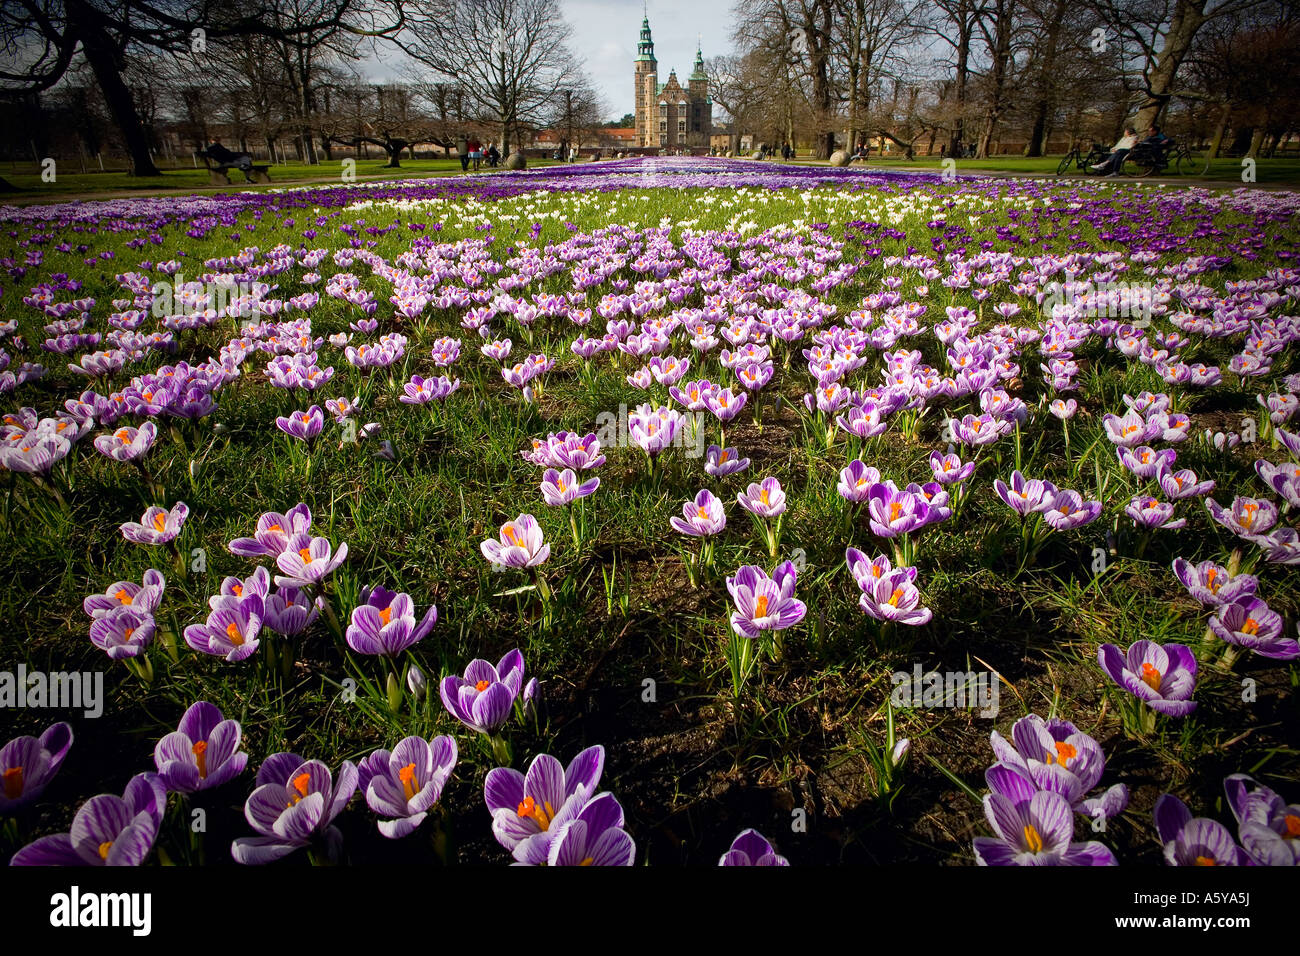 Crocus flowers in the lawn in front of Rosenborg castle Stock Photo